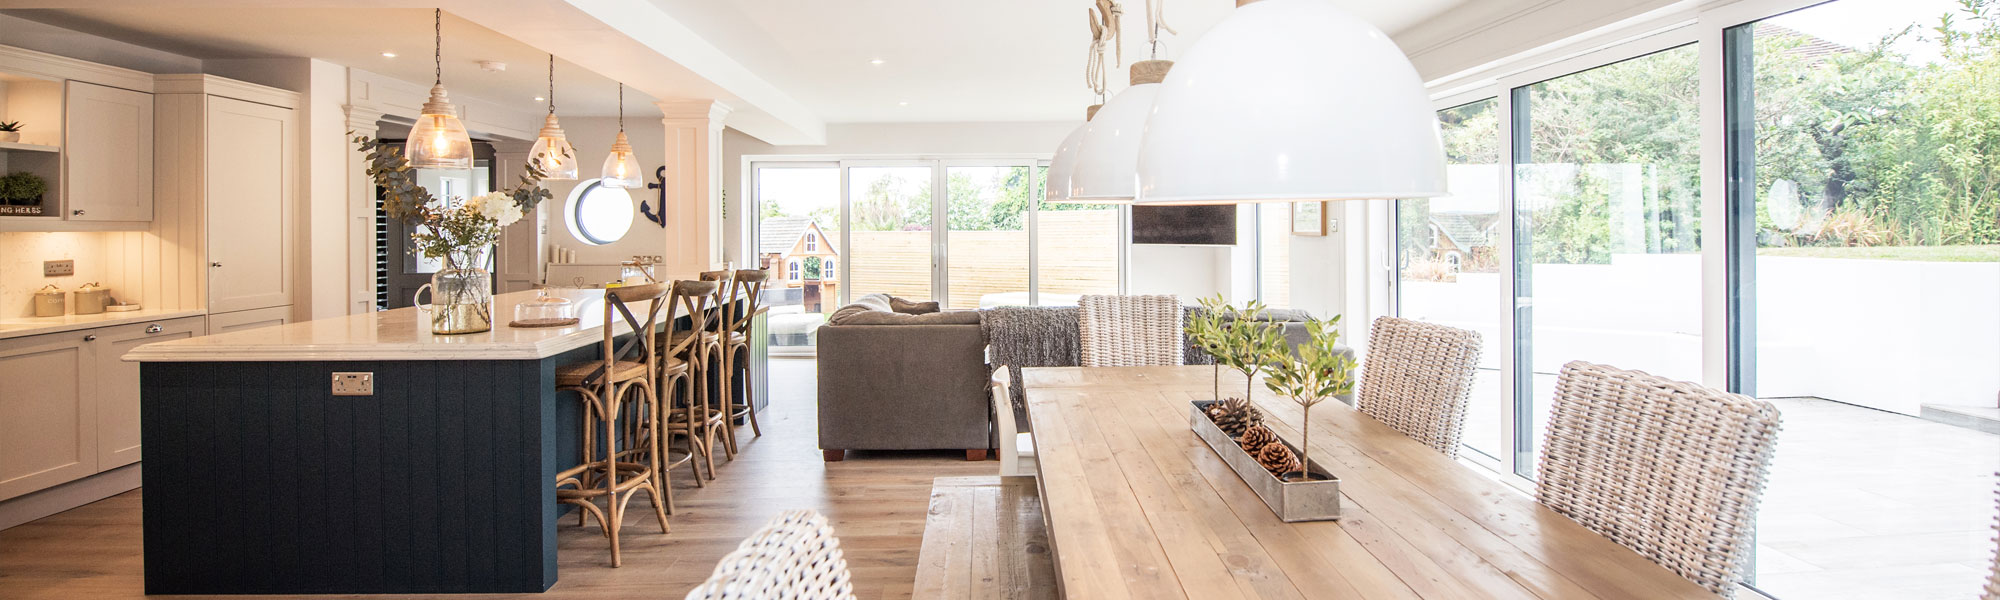 Modern kitchen and dining area in Conwy designed by The Cosy Home Company